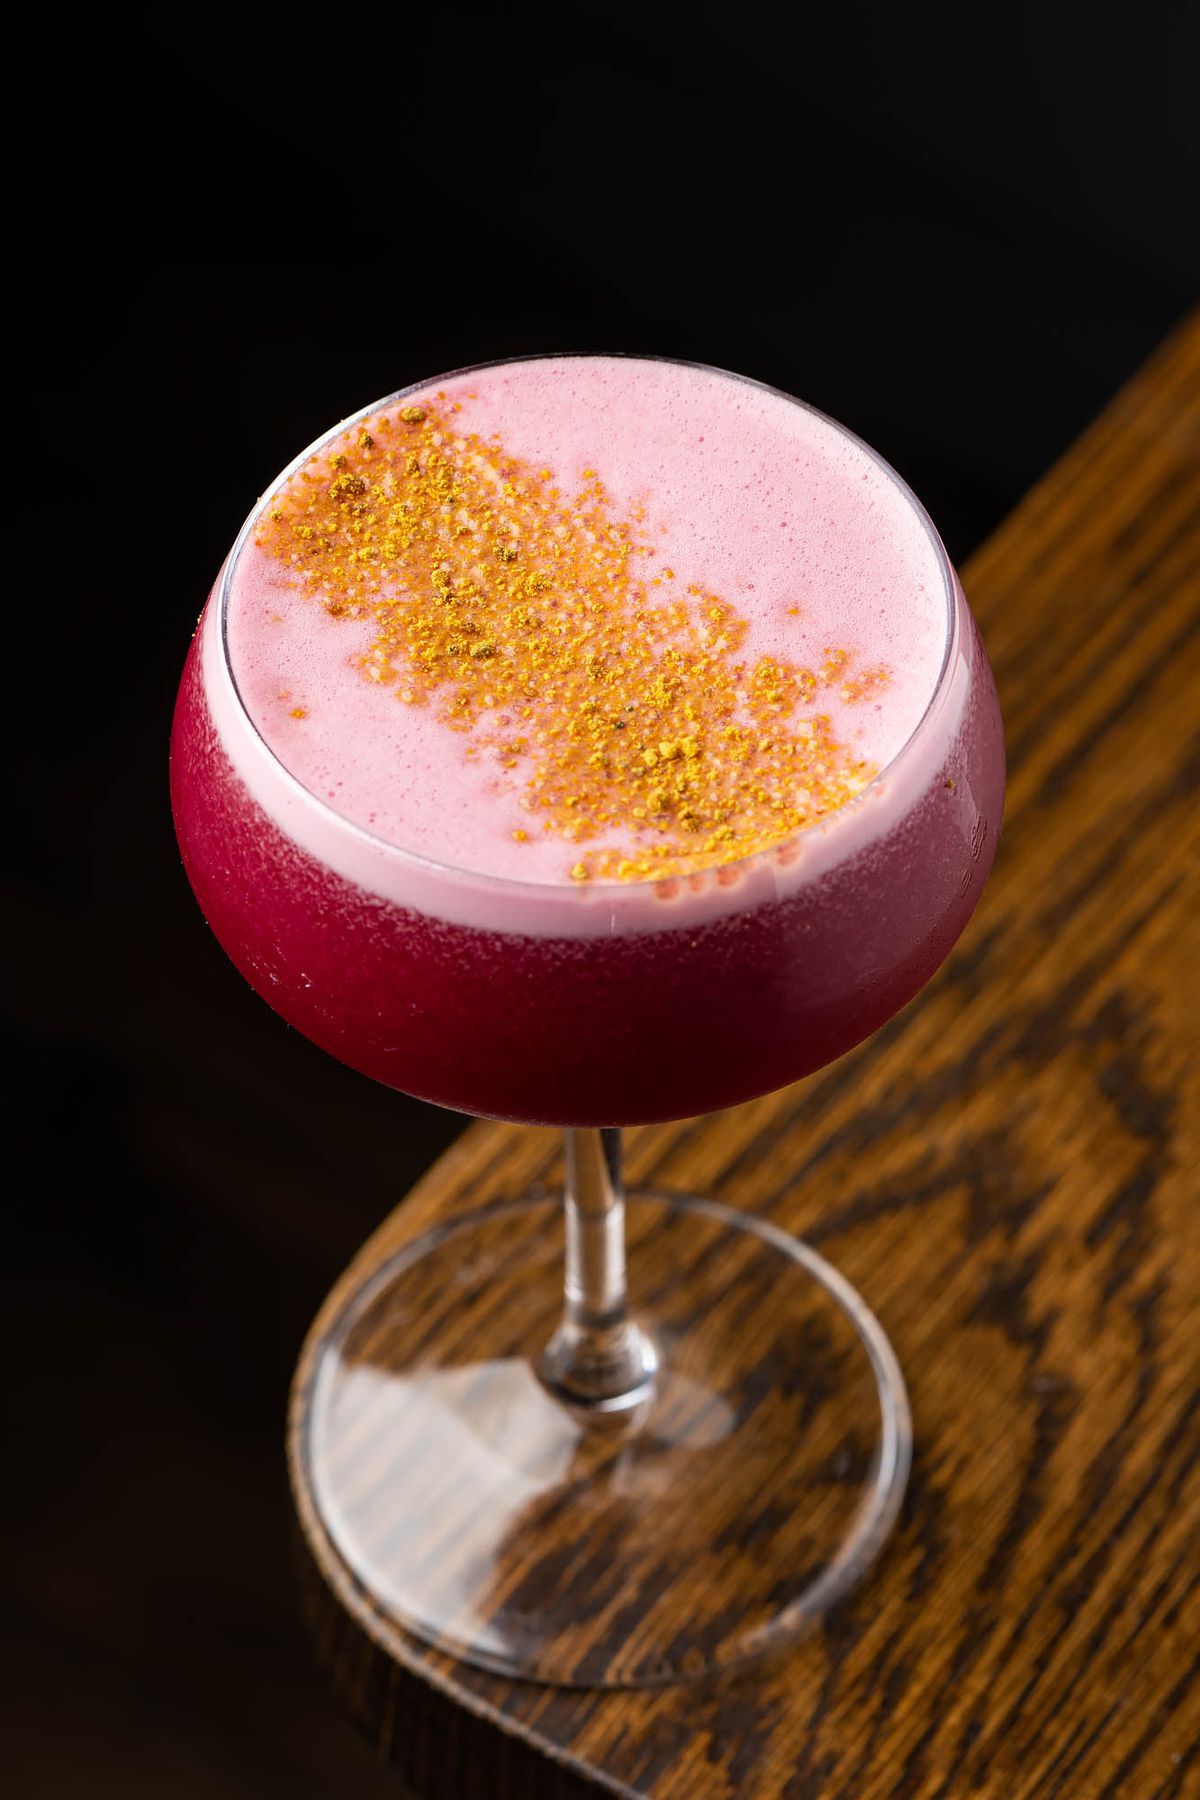 A red cocktail from Superfine Playa in Playa Vista, California.